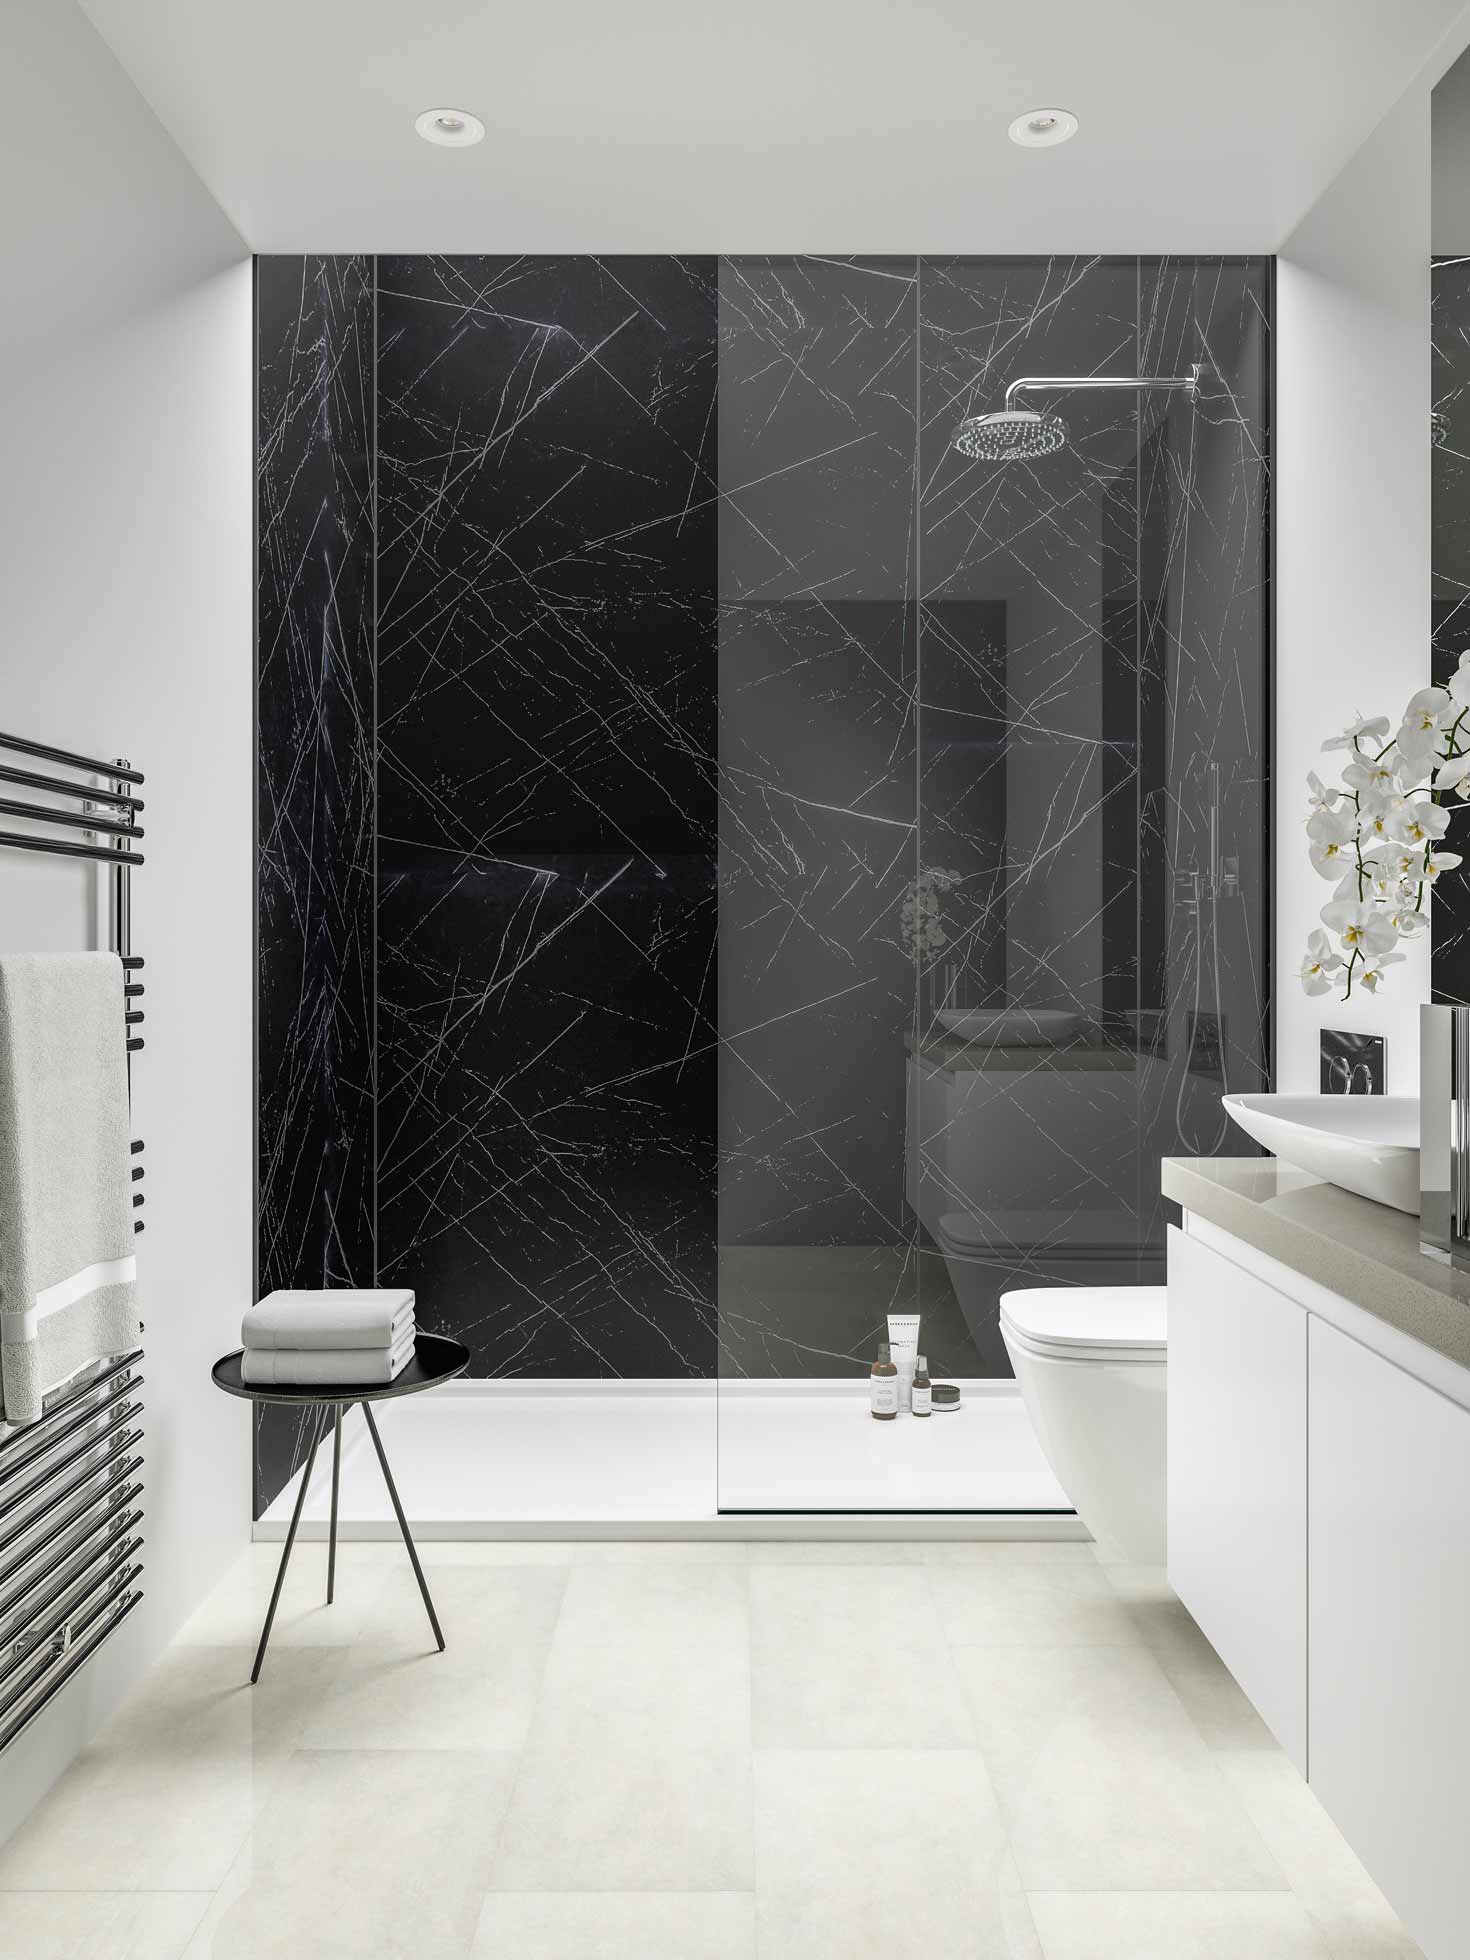 How to Choose the Right Type of Shower Enclosure for Your Bathroom Suite